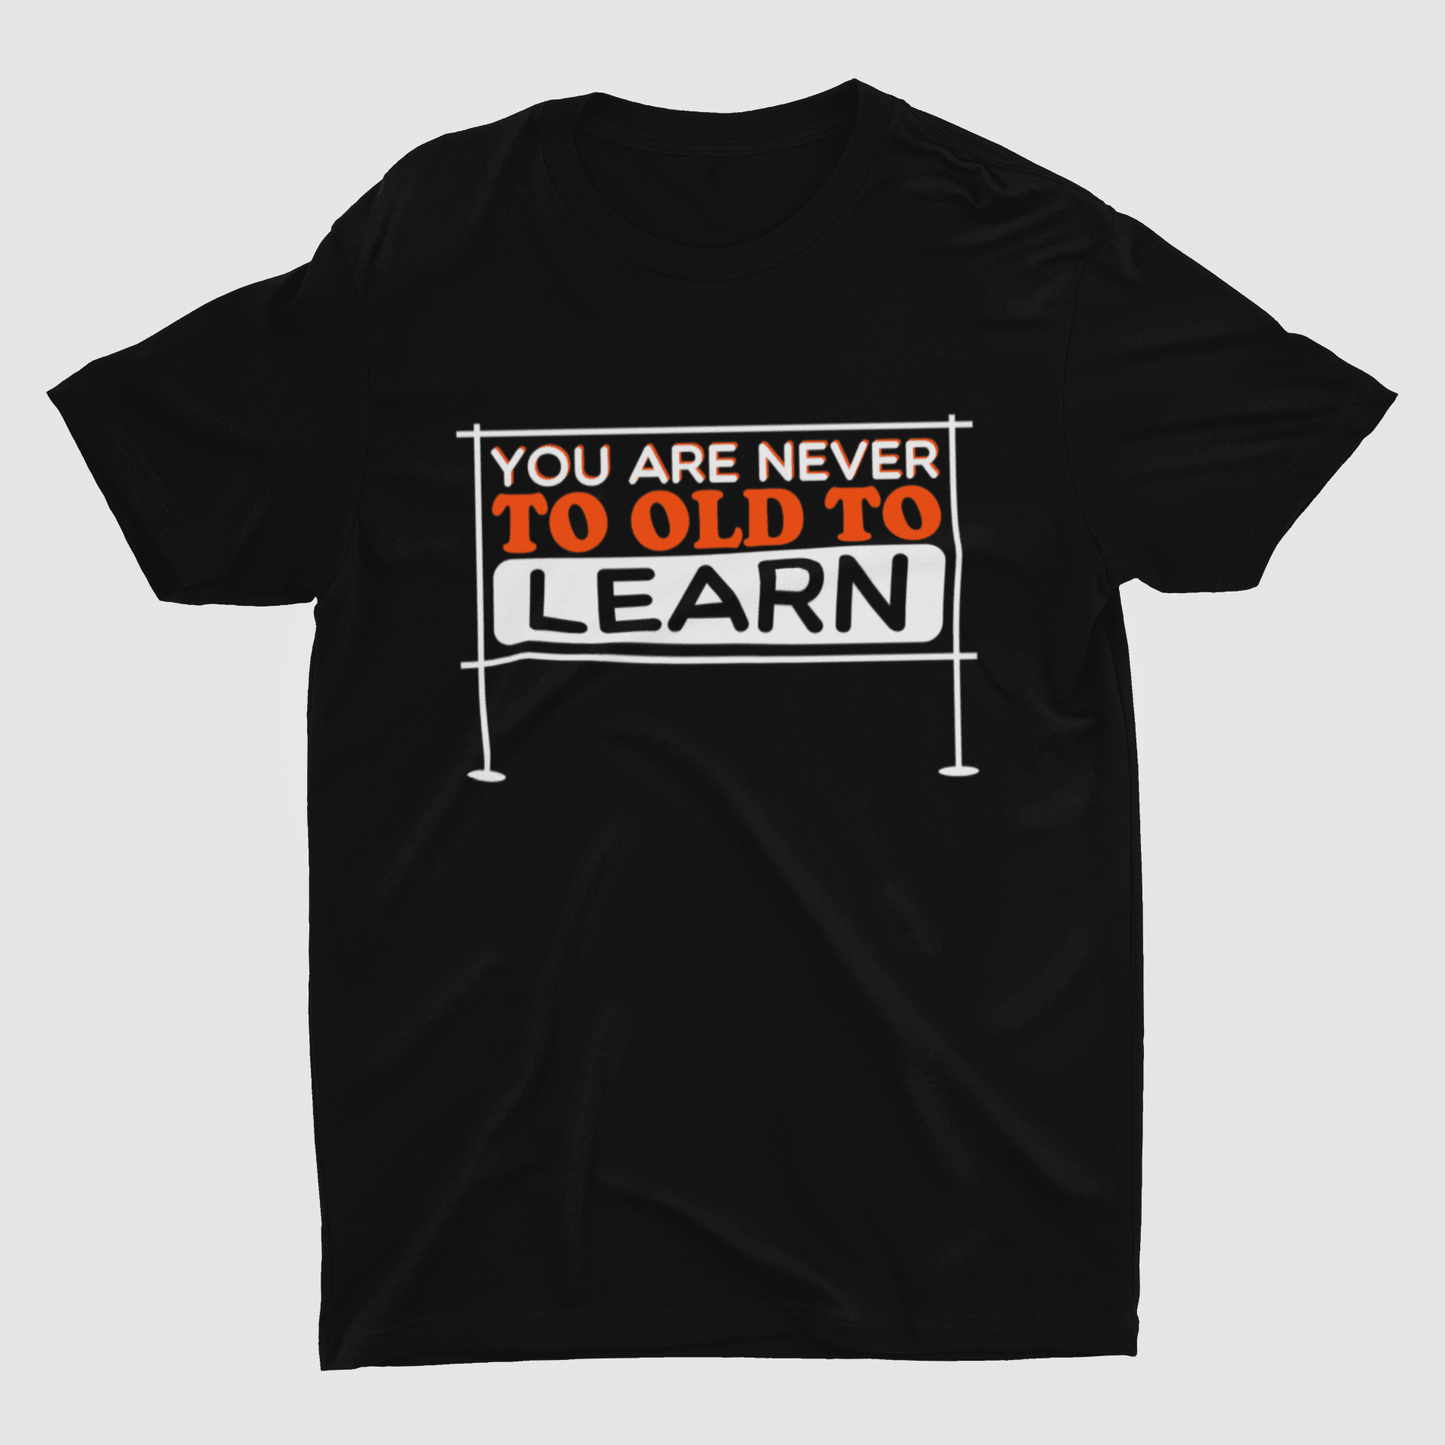 You Are Never Too Old To Learn Black T-Shirt - ATOM